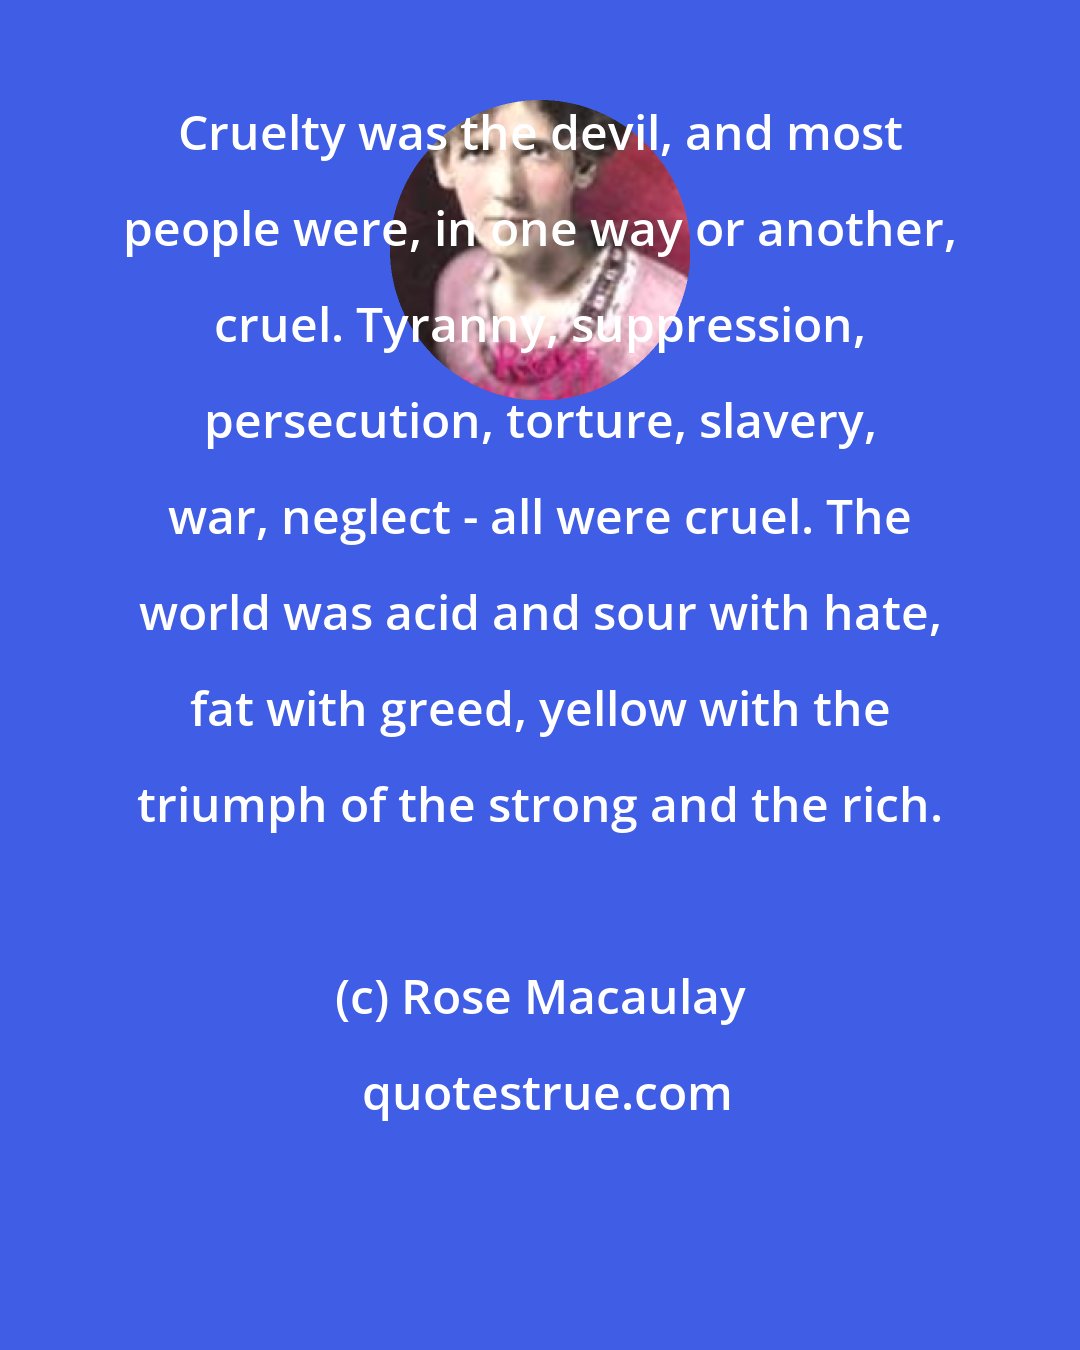 Rose Macaulay: Cruelty was the devil, and most people were, in one way or another, cruel. Tyranny, suppression, persecution, torture, slavery, war, neglect - all were cruel. The world was acid and sour with hate, fat with greed, yellow with the triumph of the strong and the rich.